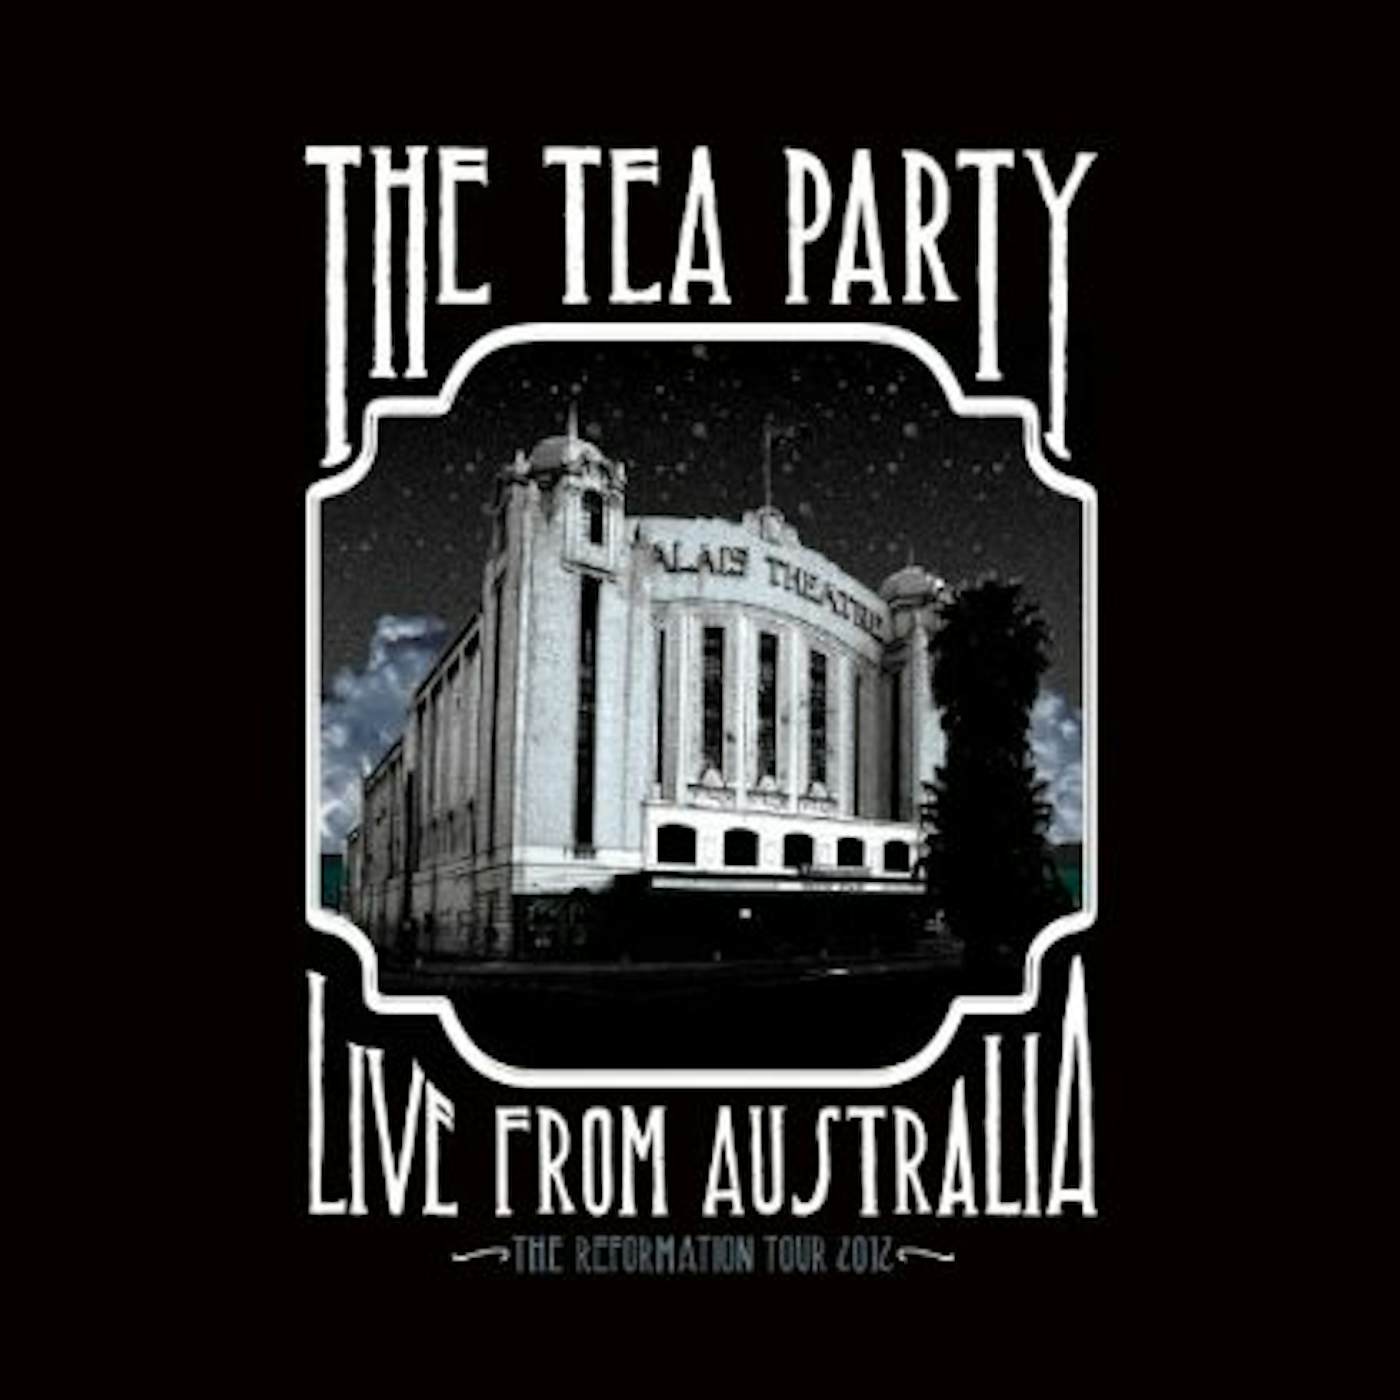 The Tea Party LIVE FROM AUSTRALIA CD